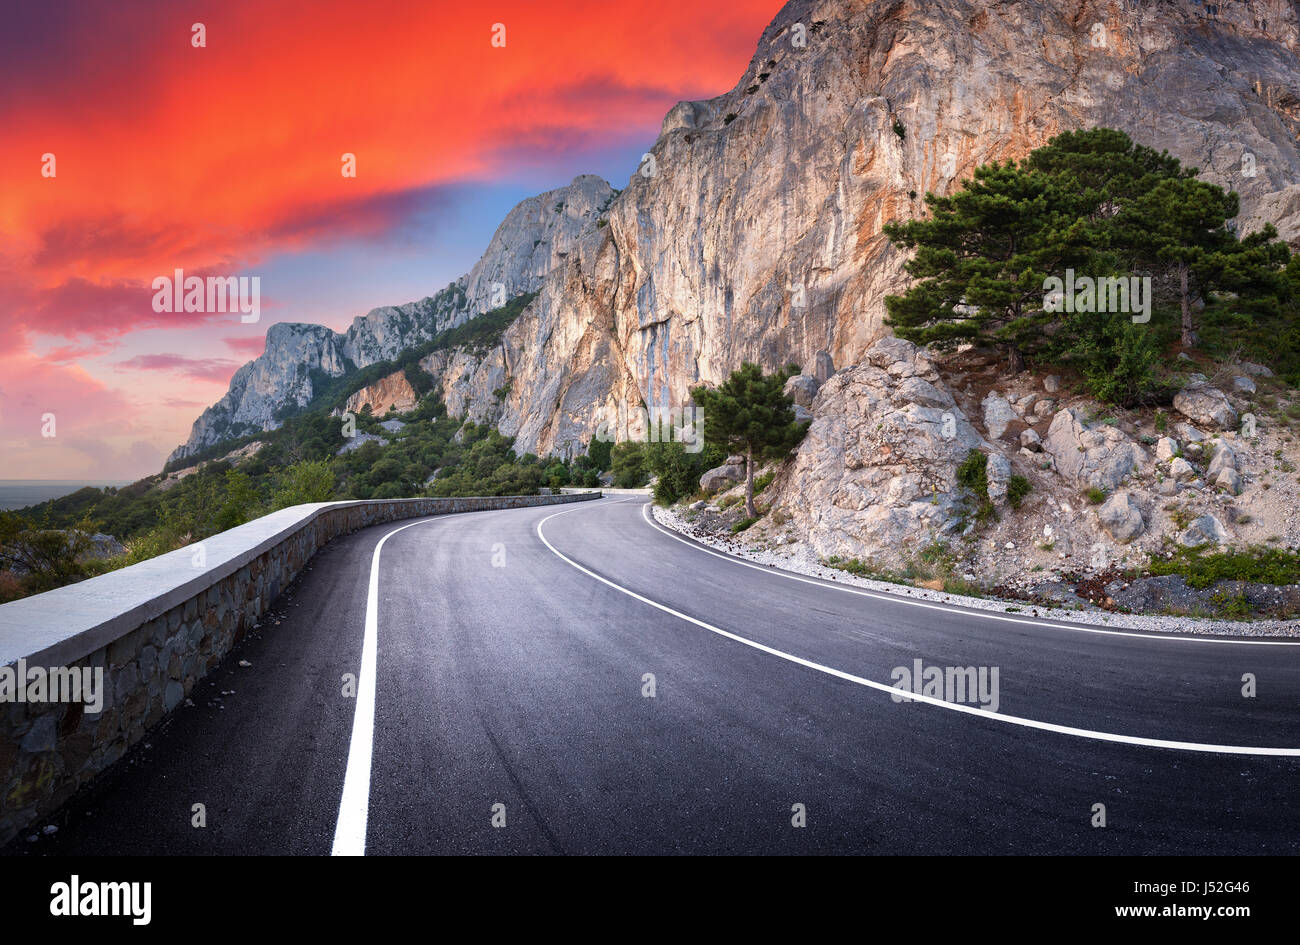 Asphalt road. Landscape with beautiful winding mountain road with a perfect asphalt, high rocks, trees, amazing sky with red clouds at sunset Stock Photo